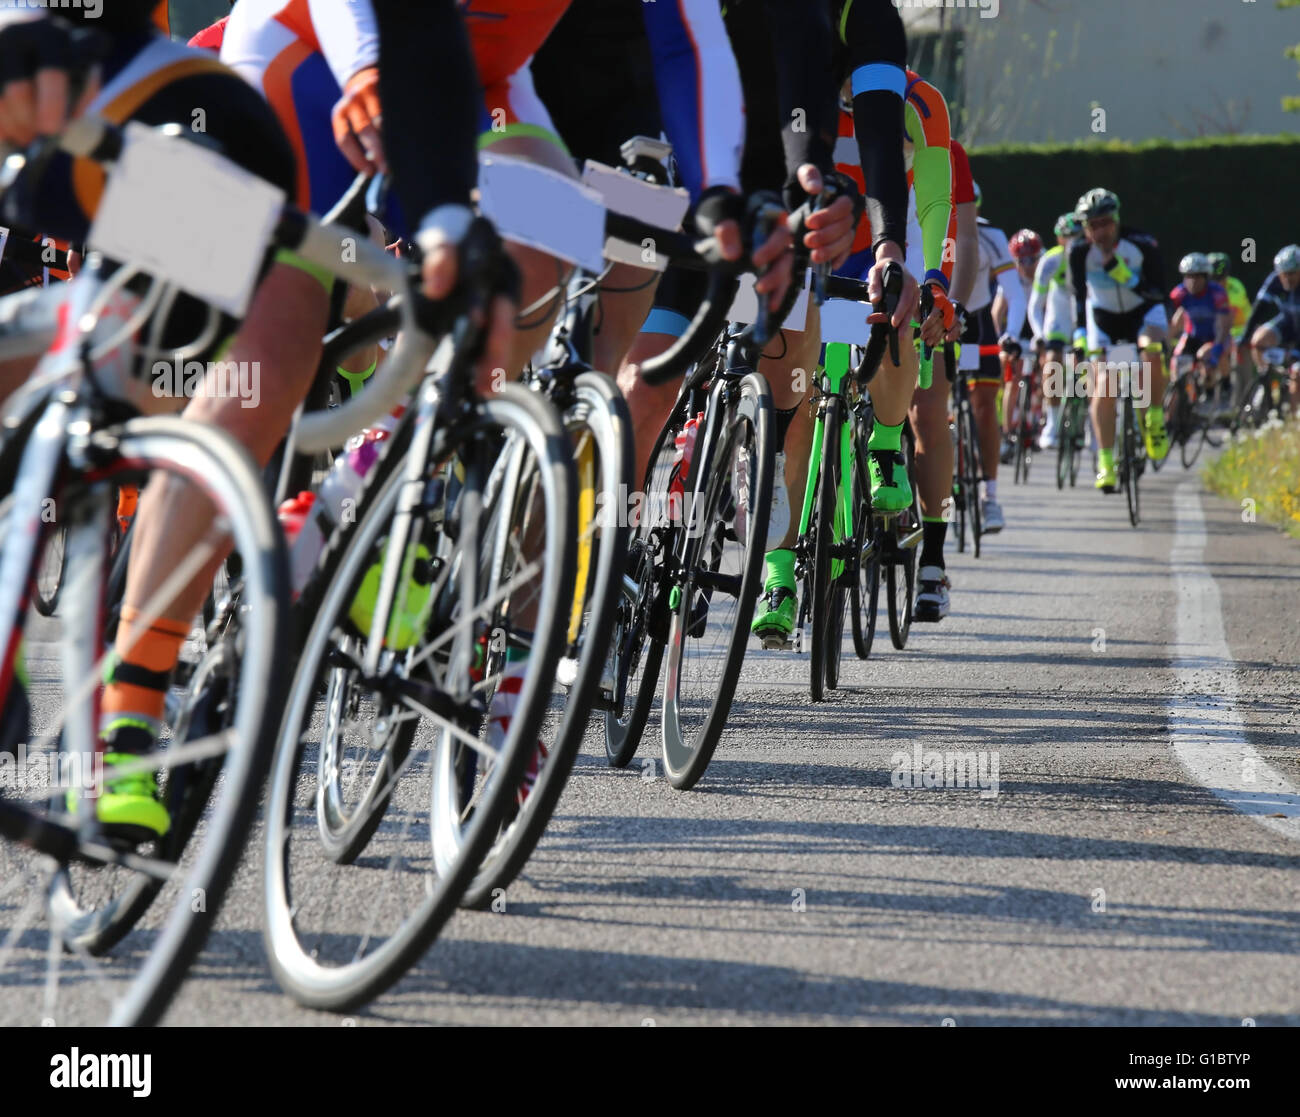 many race bike and professional cyclists during the cycling race on the road Stock Photo